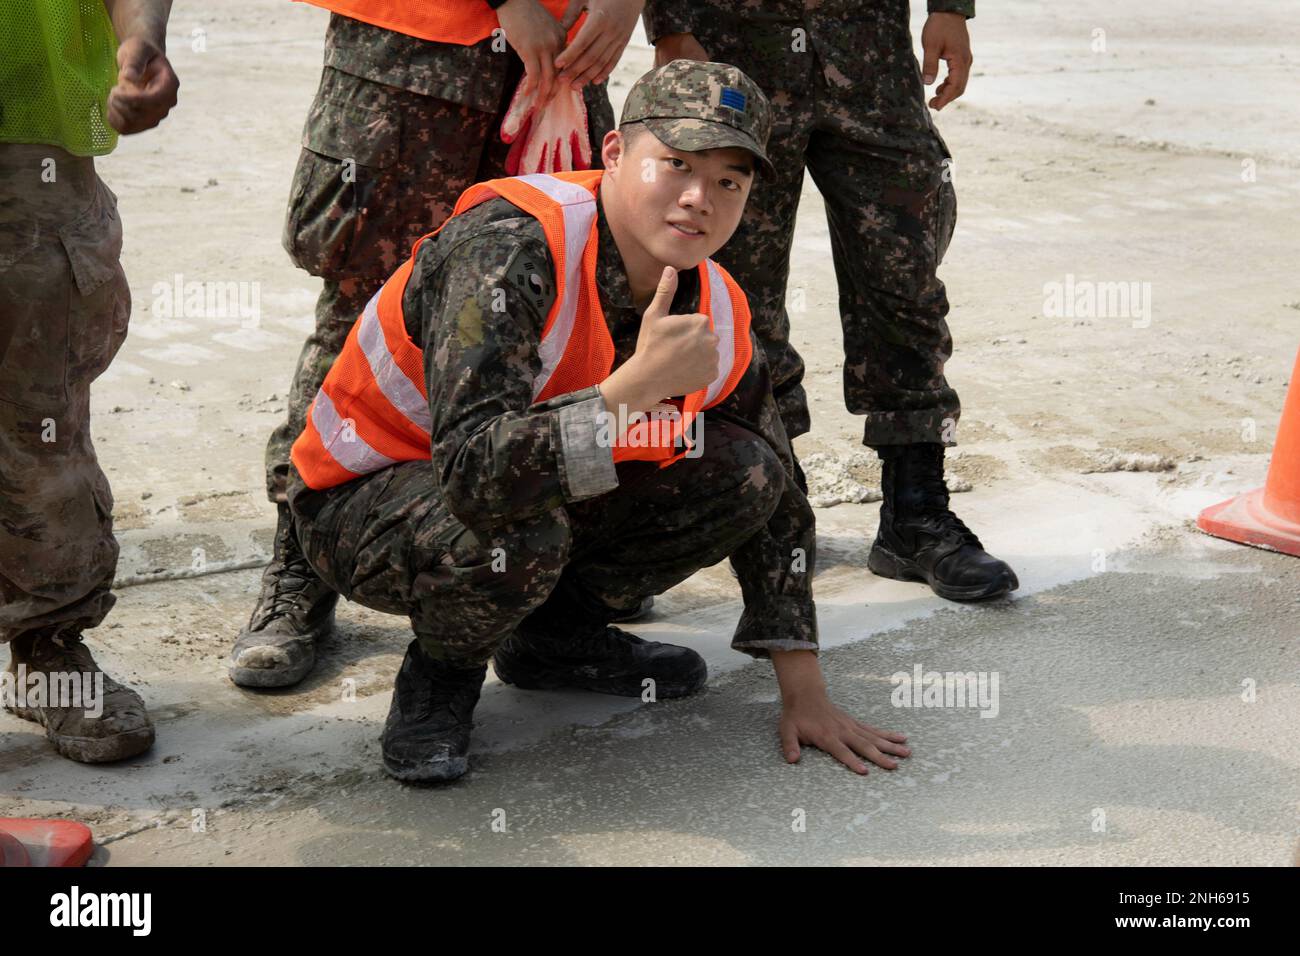 A member of the Republic of Korea Air Force (ROKAF) feels the finished product of a recently repaired cement pad during rapid airfield damage repair training, July 19, 2022 at Gwangju Air Base, Republic of Korea. During the combined training, members from the ROKAF and U.S. Air Force worked together to repair a damaged cement training pad and had the opportunity to strengthen their interoperability. Stock Photo